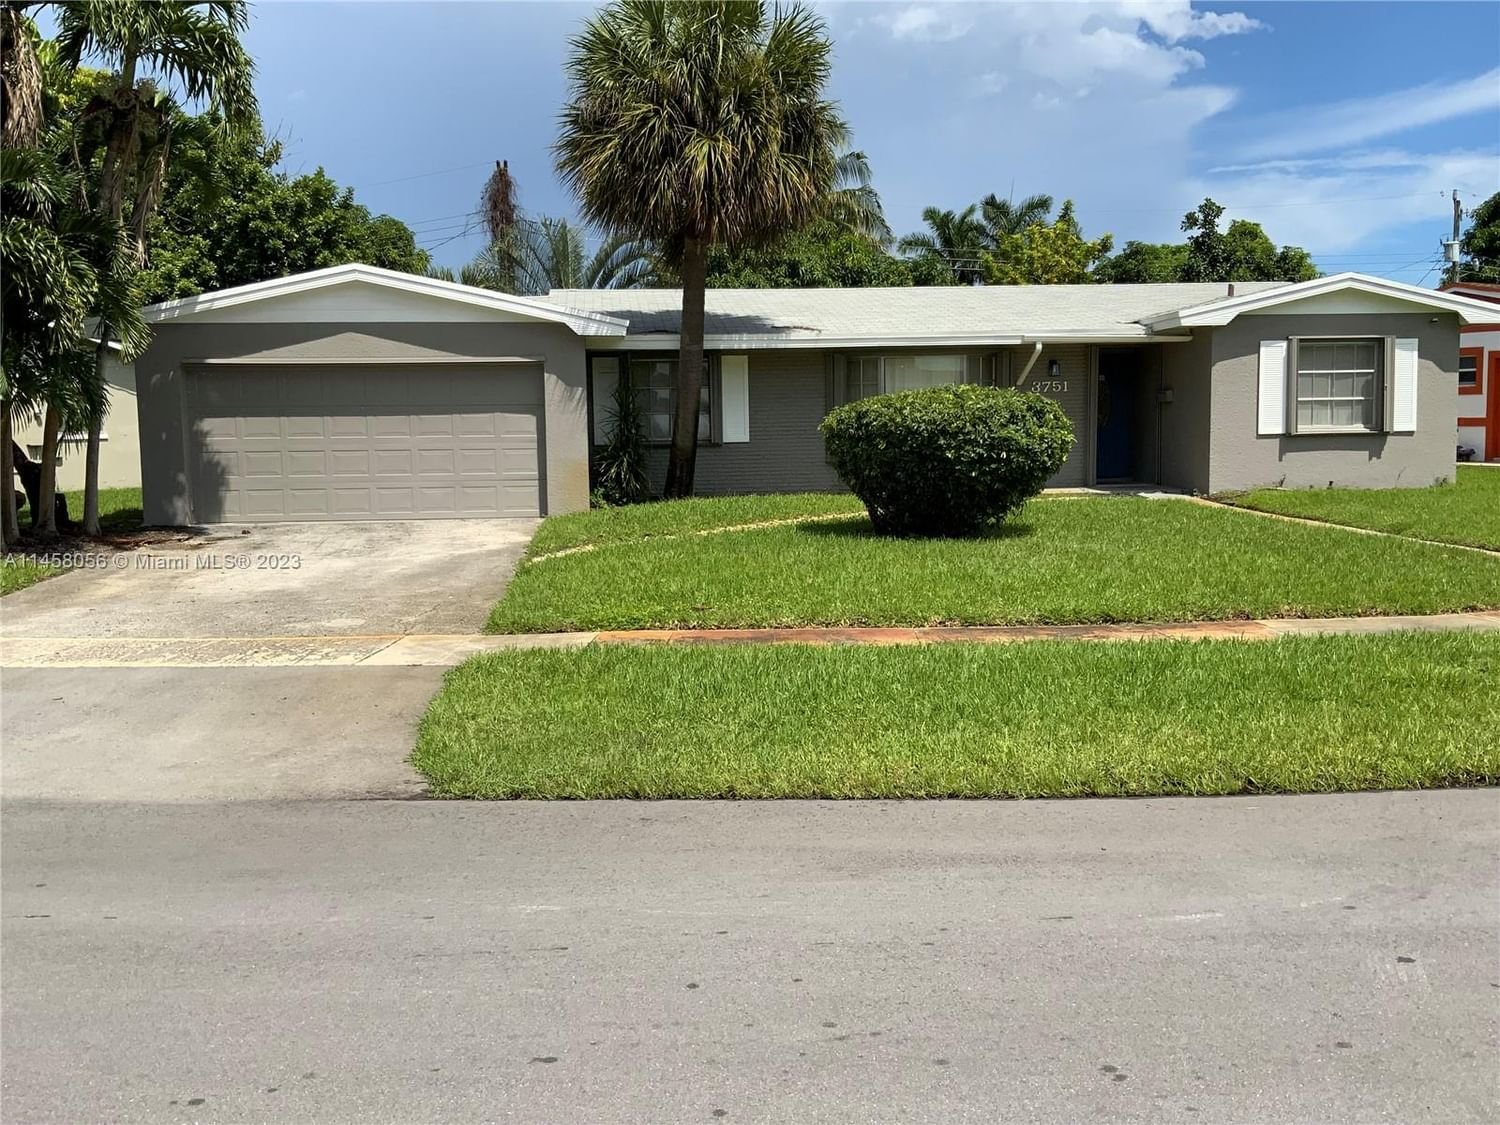 Real estate property located at 3751 27th St, Broward County, Lauderdale Lakes, FL